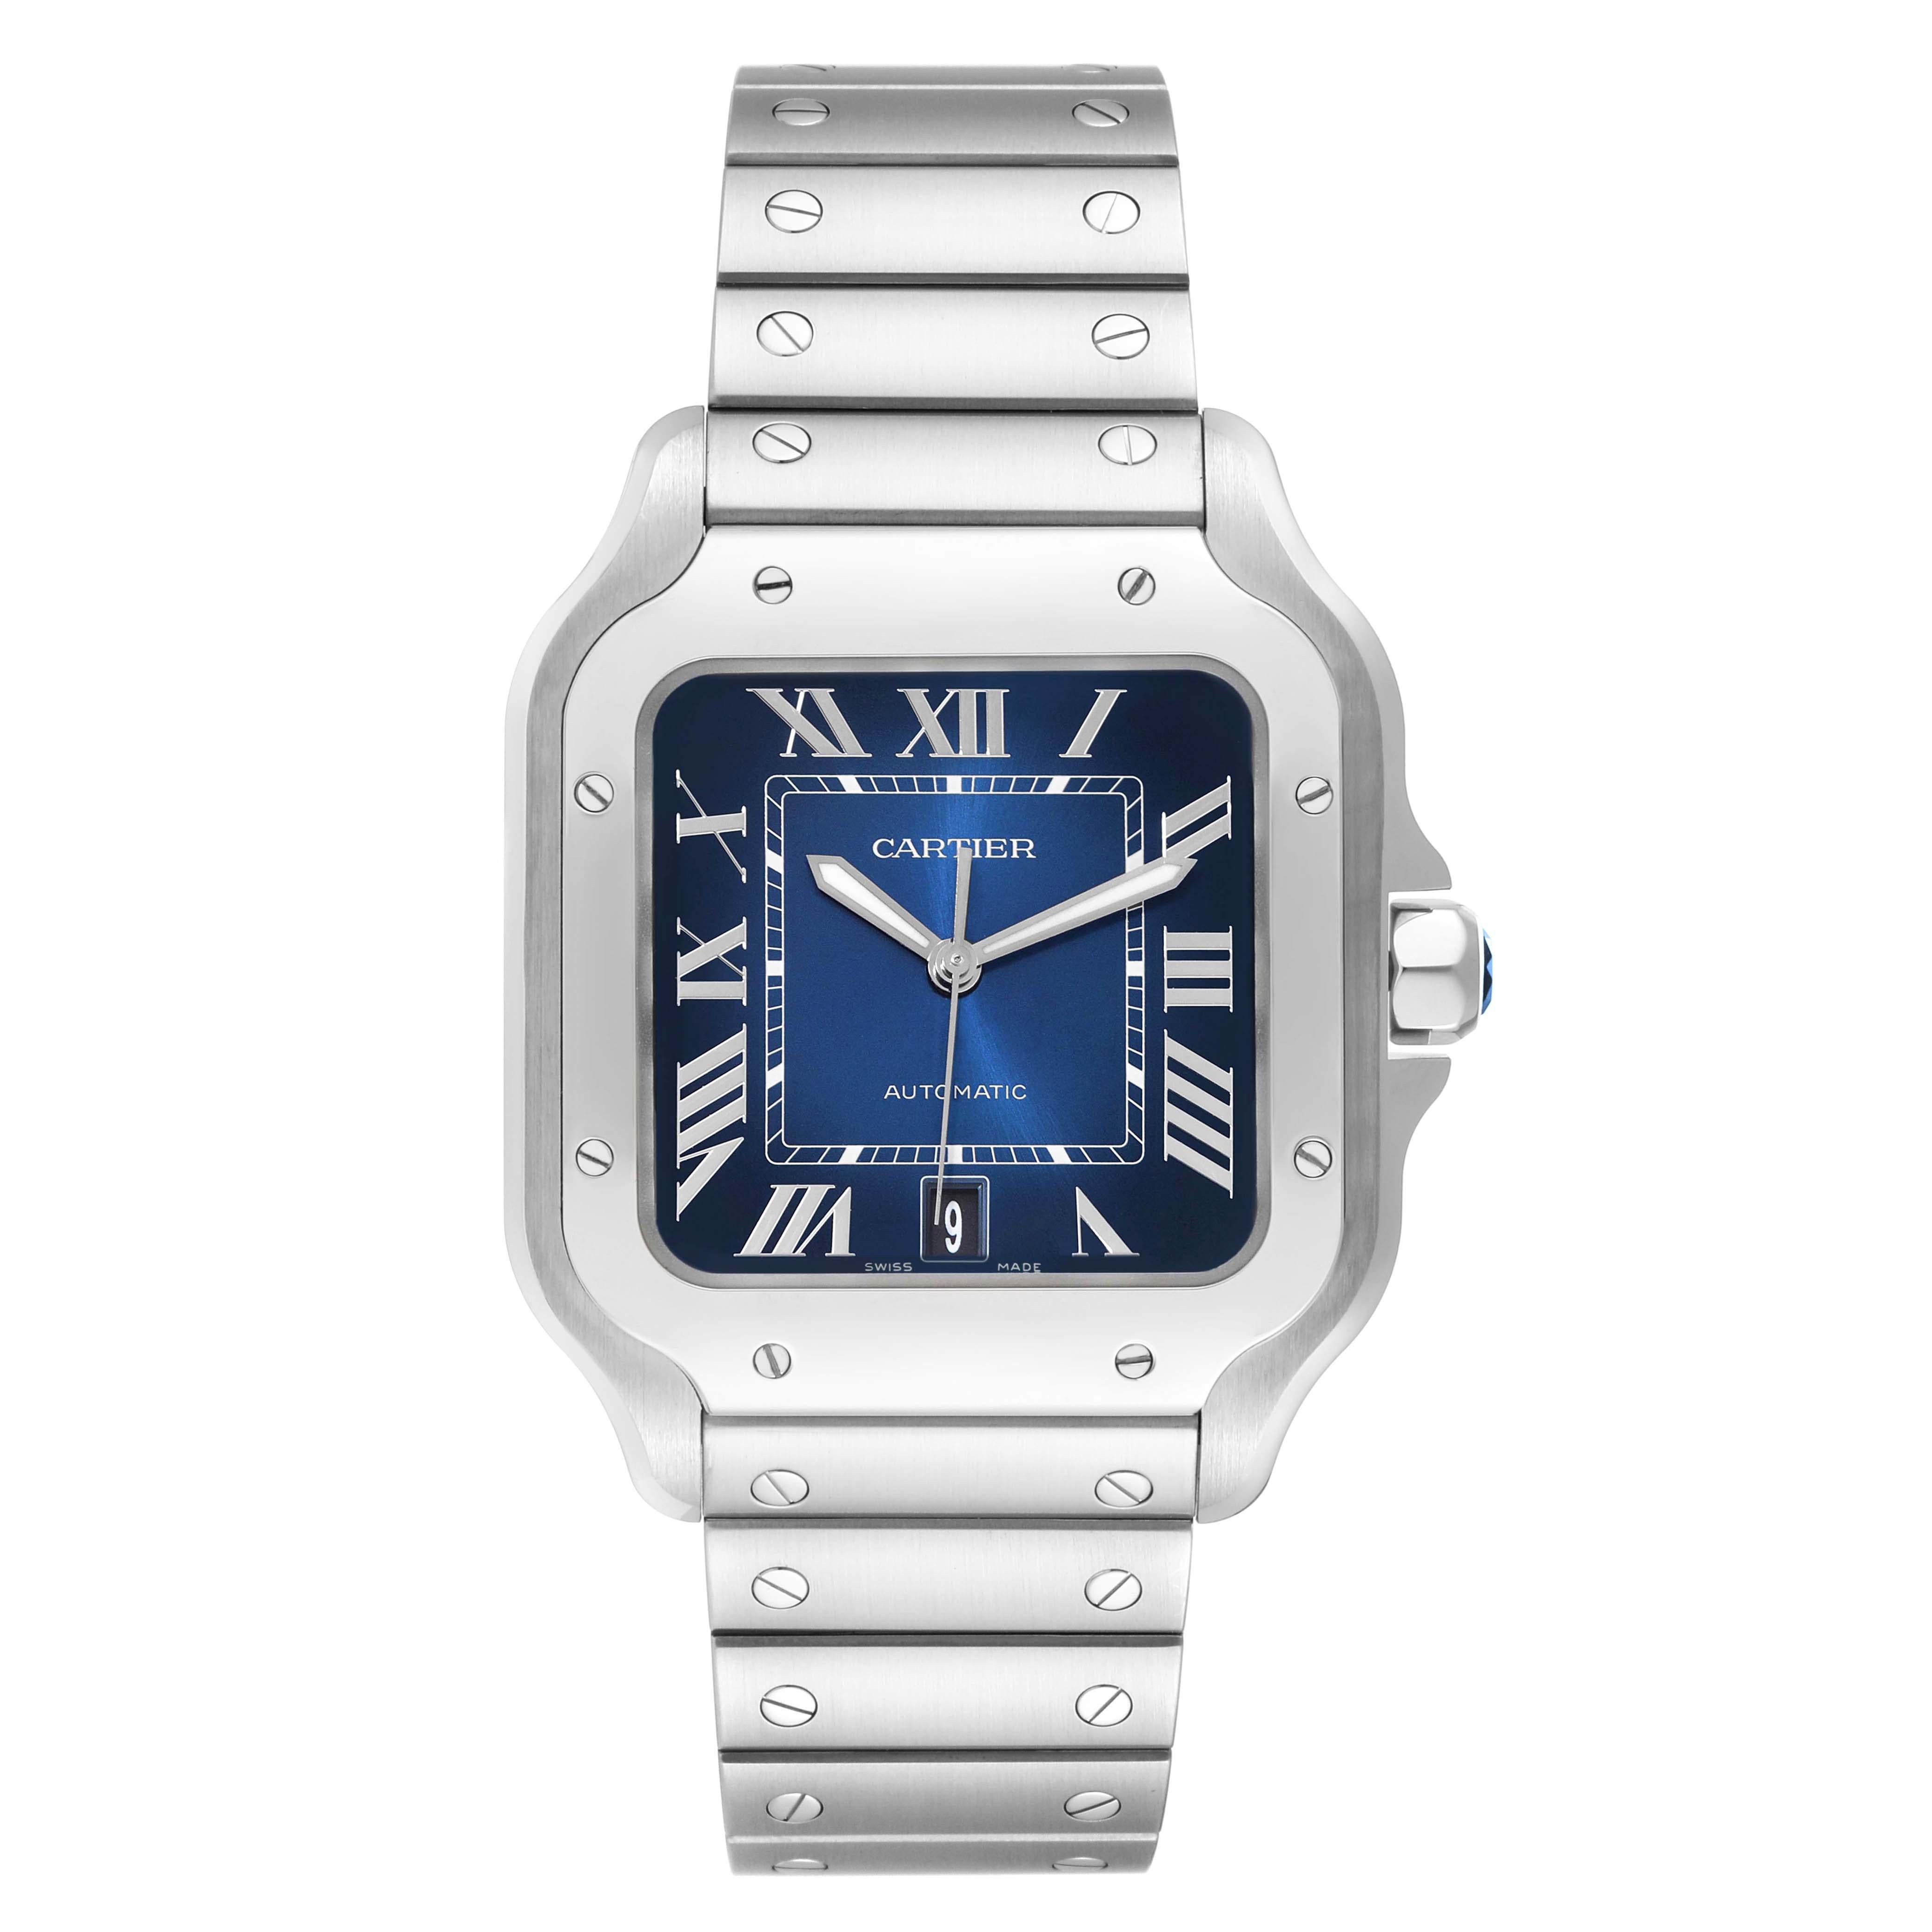 Cartier Santos Blue Dial Steel Mens Watch WSSA0030 Box Card. Automatic self-winding movement. Stainless steel case 39.8 x 47.5 mm. Protected octagonal crown set with a faceted blue spinel. Stainless steel bezel punctuated with 8 signature screws.